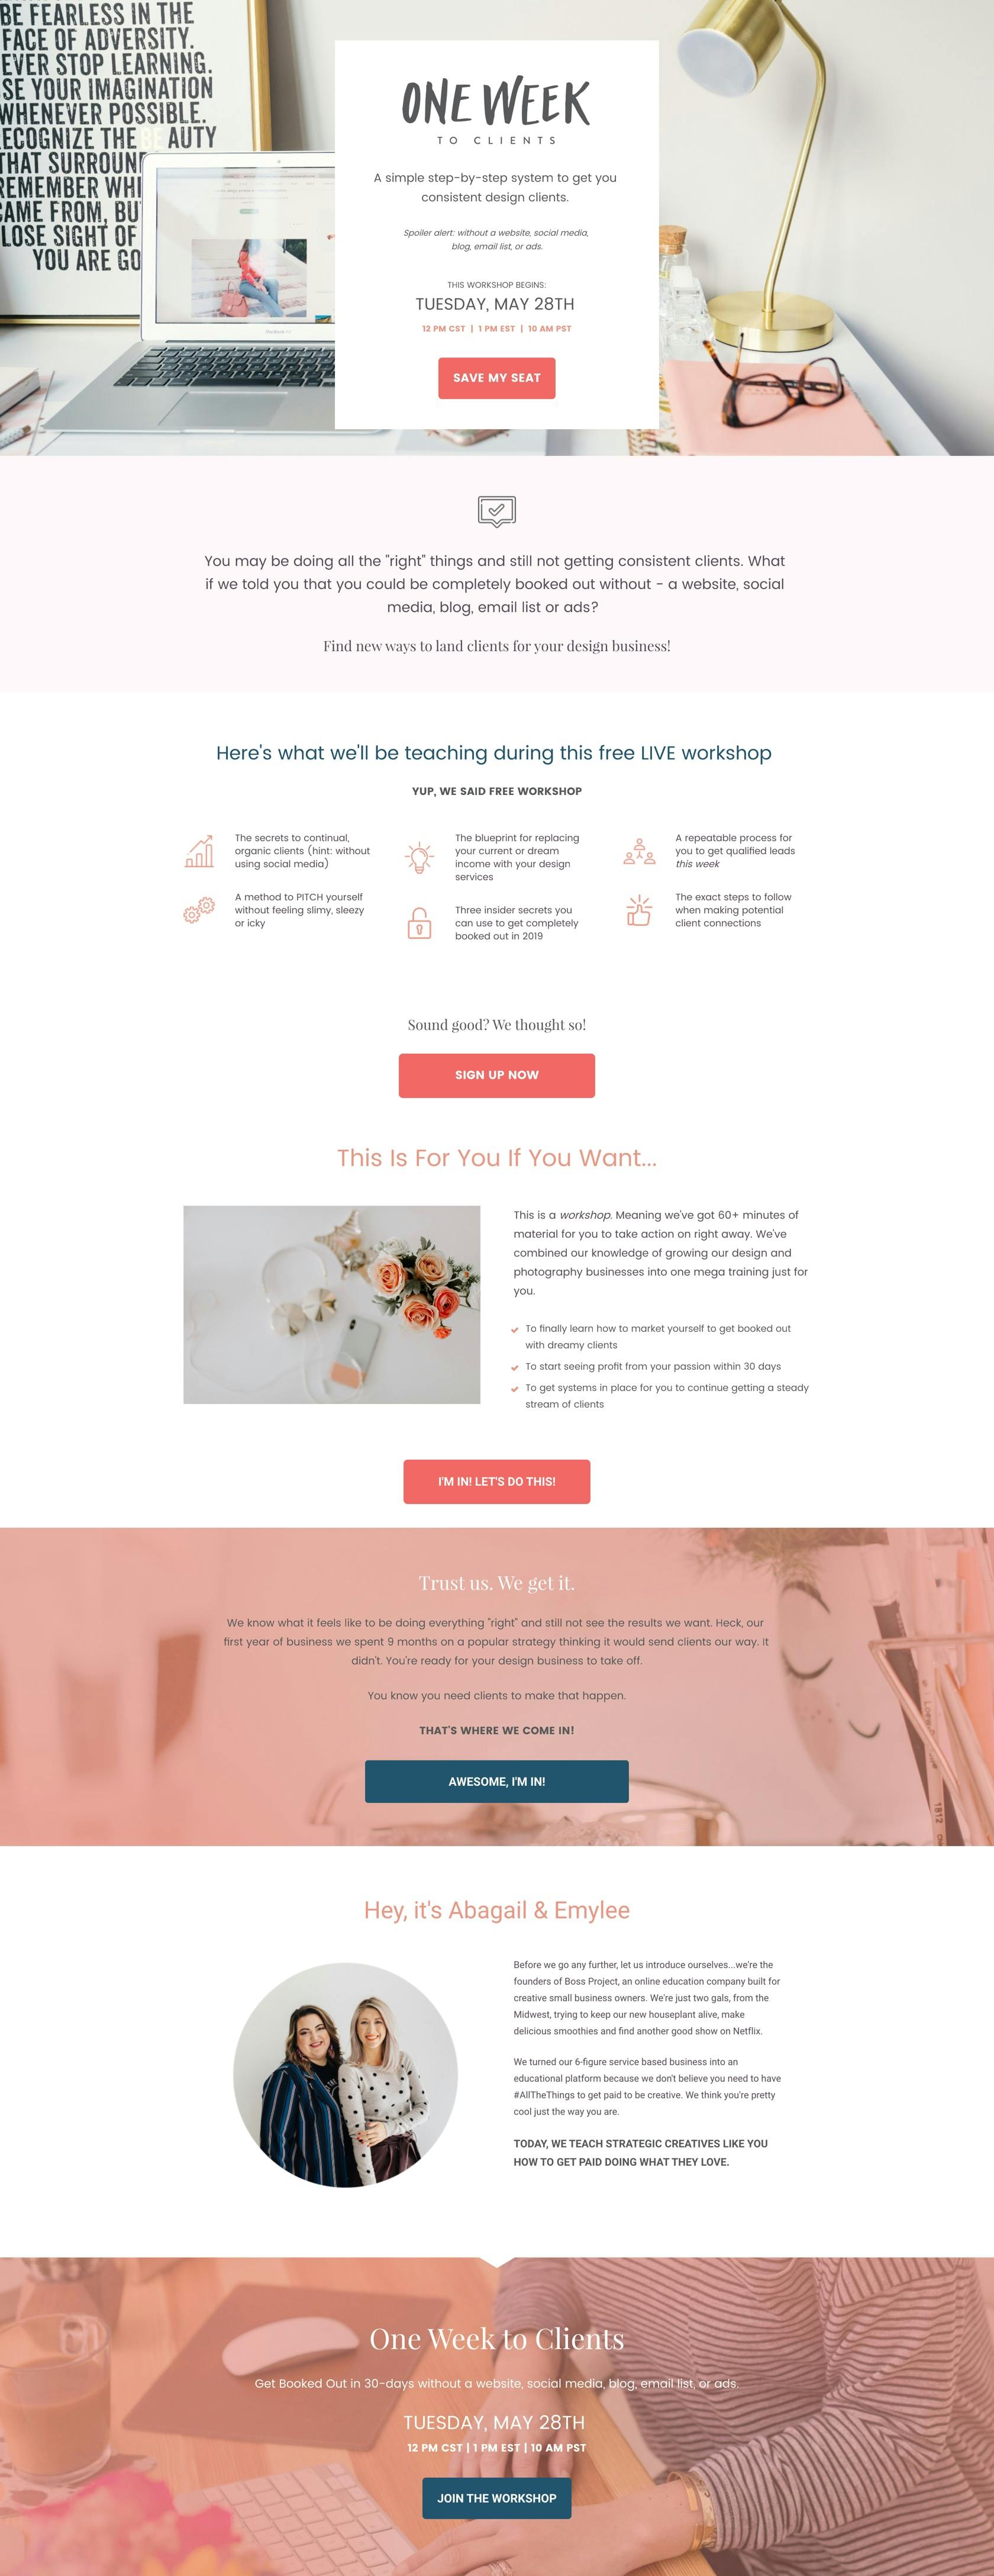 best lead generation landing page examples 2019